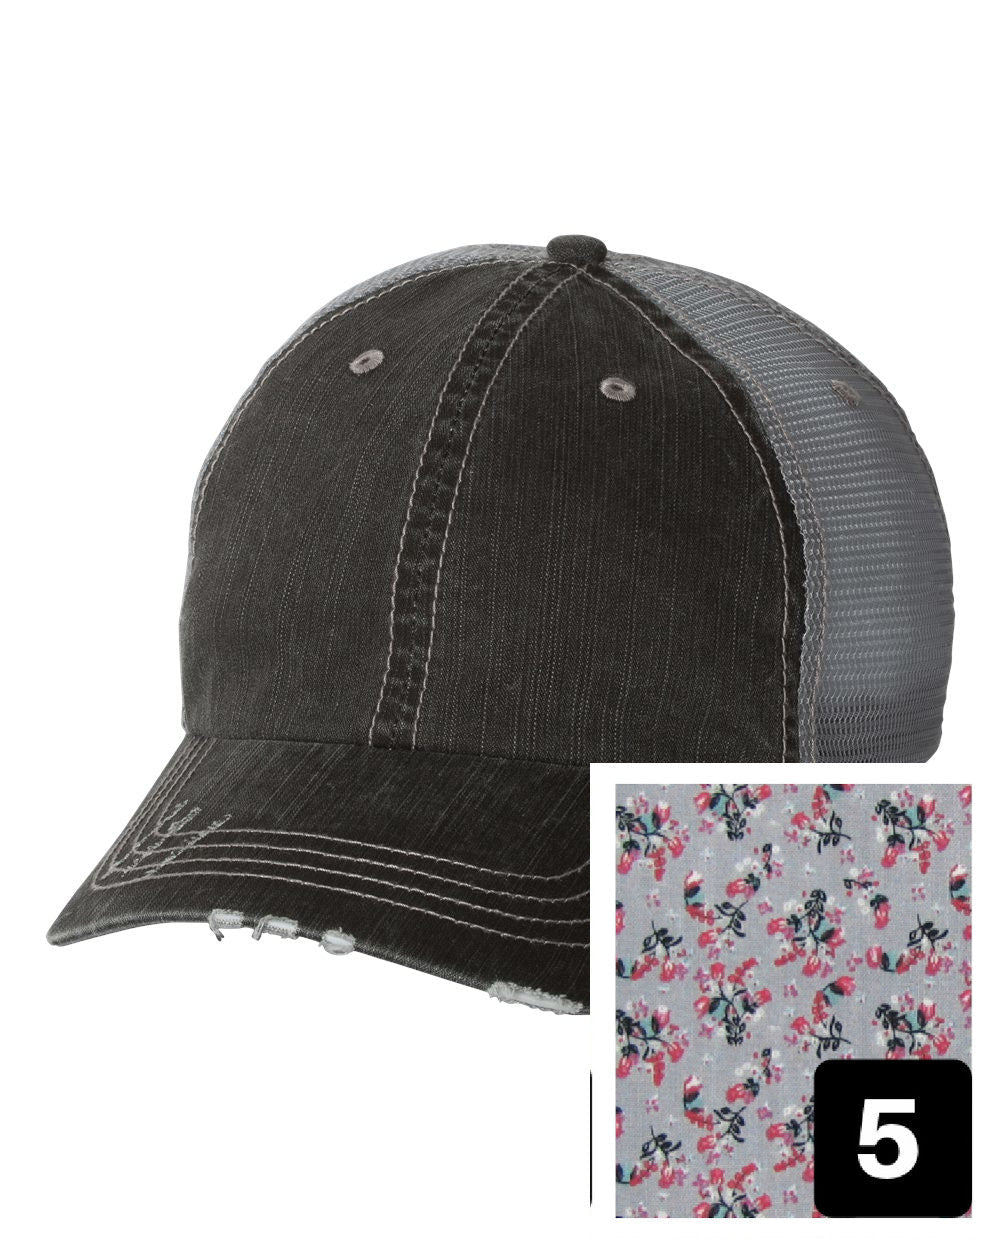 gray distressed trucker hat with purple and pink floral fabric state of South Dakota